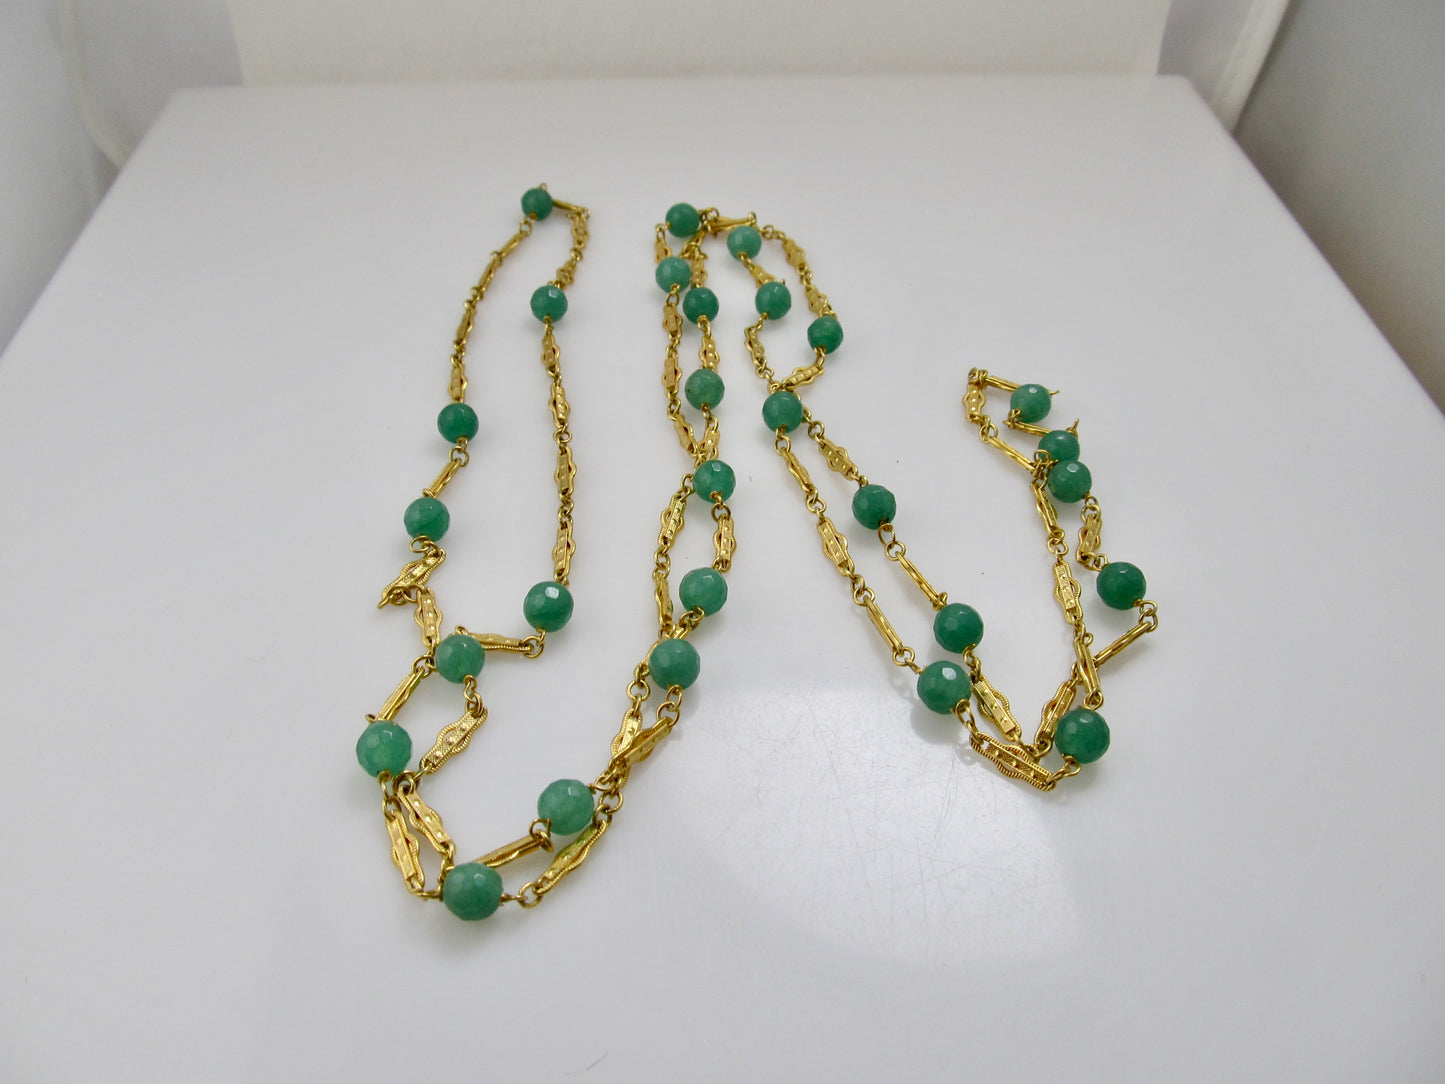 Vintage long 14k yellow gold chain with chalcedony